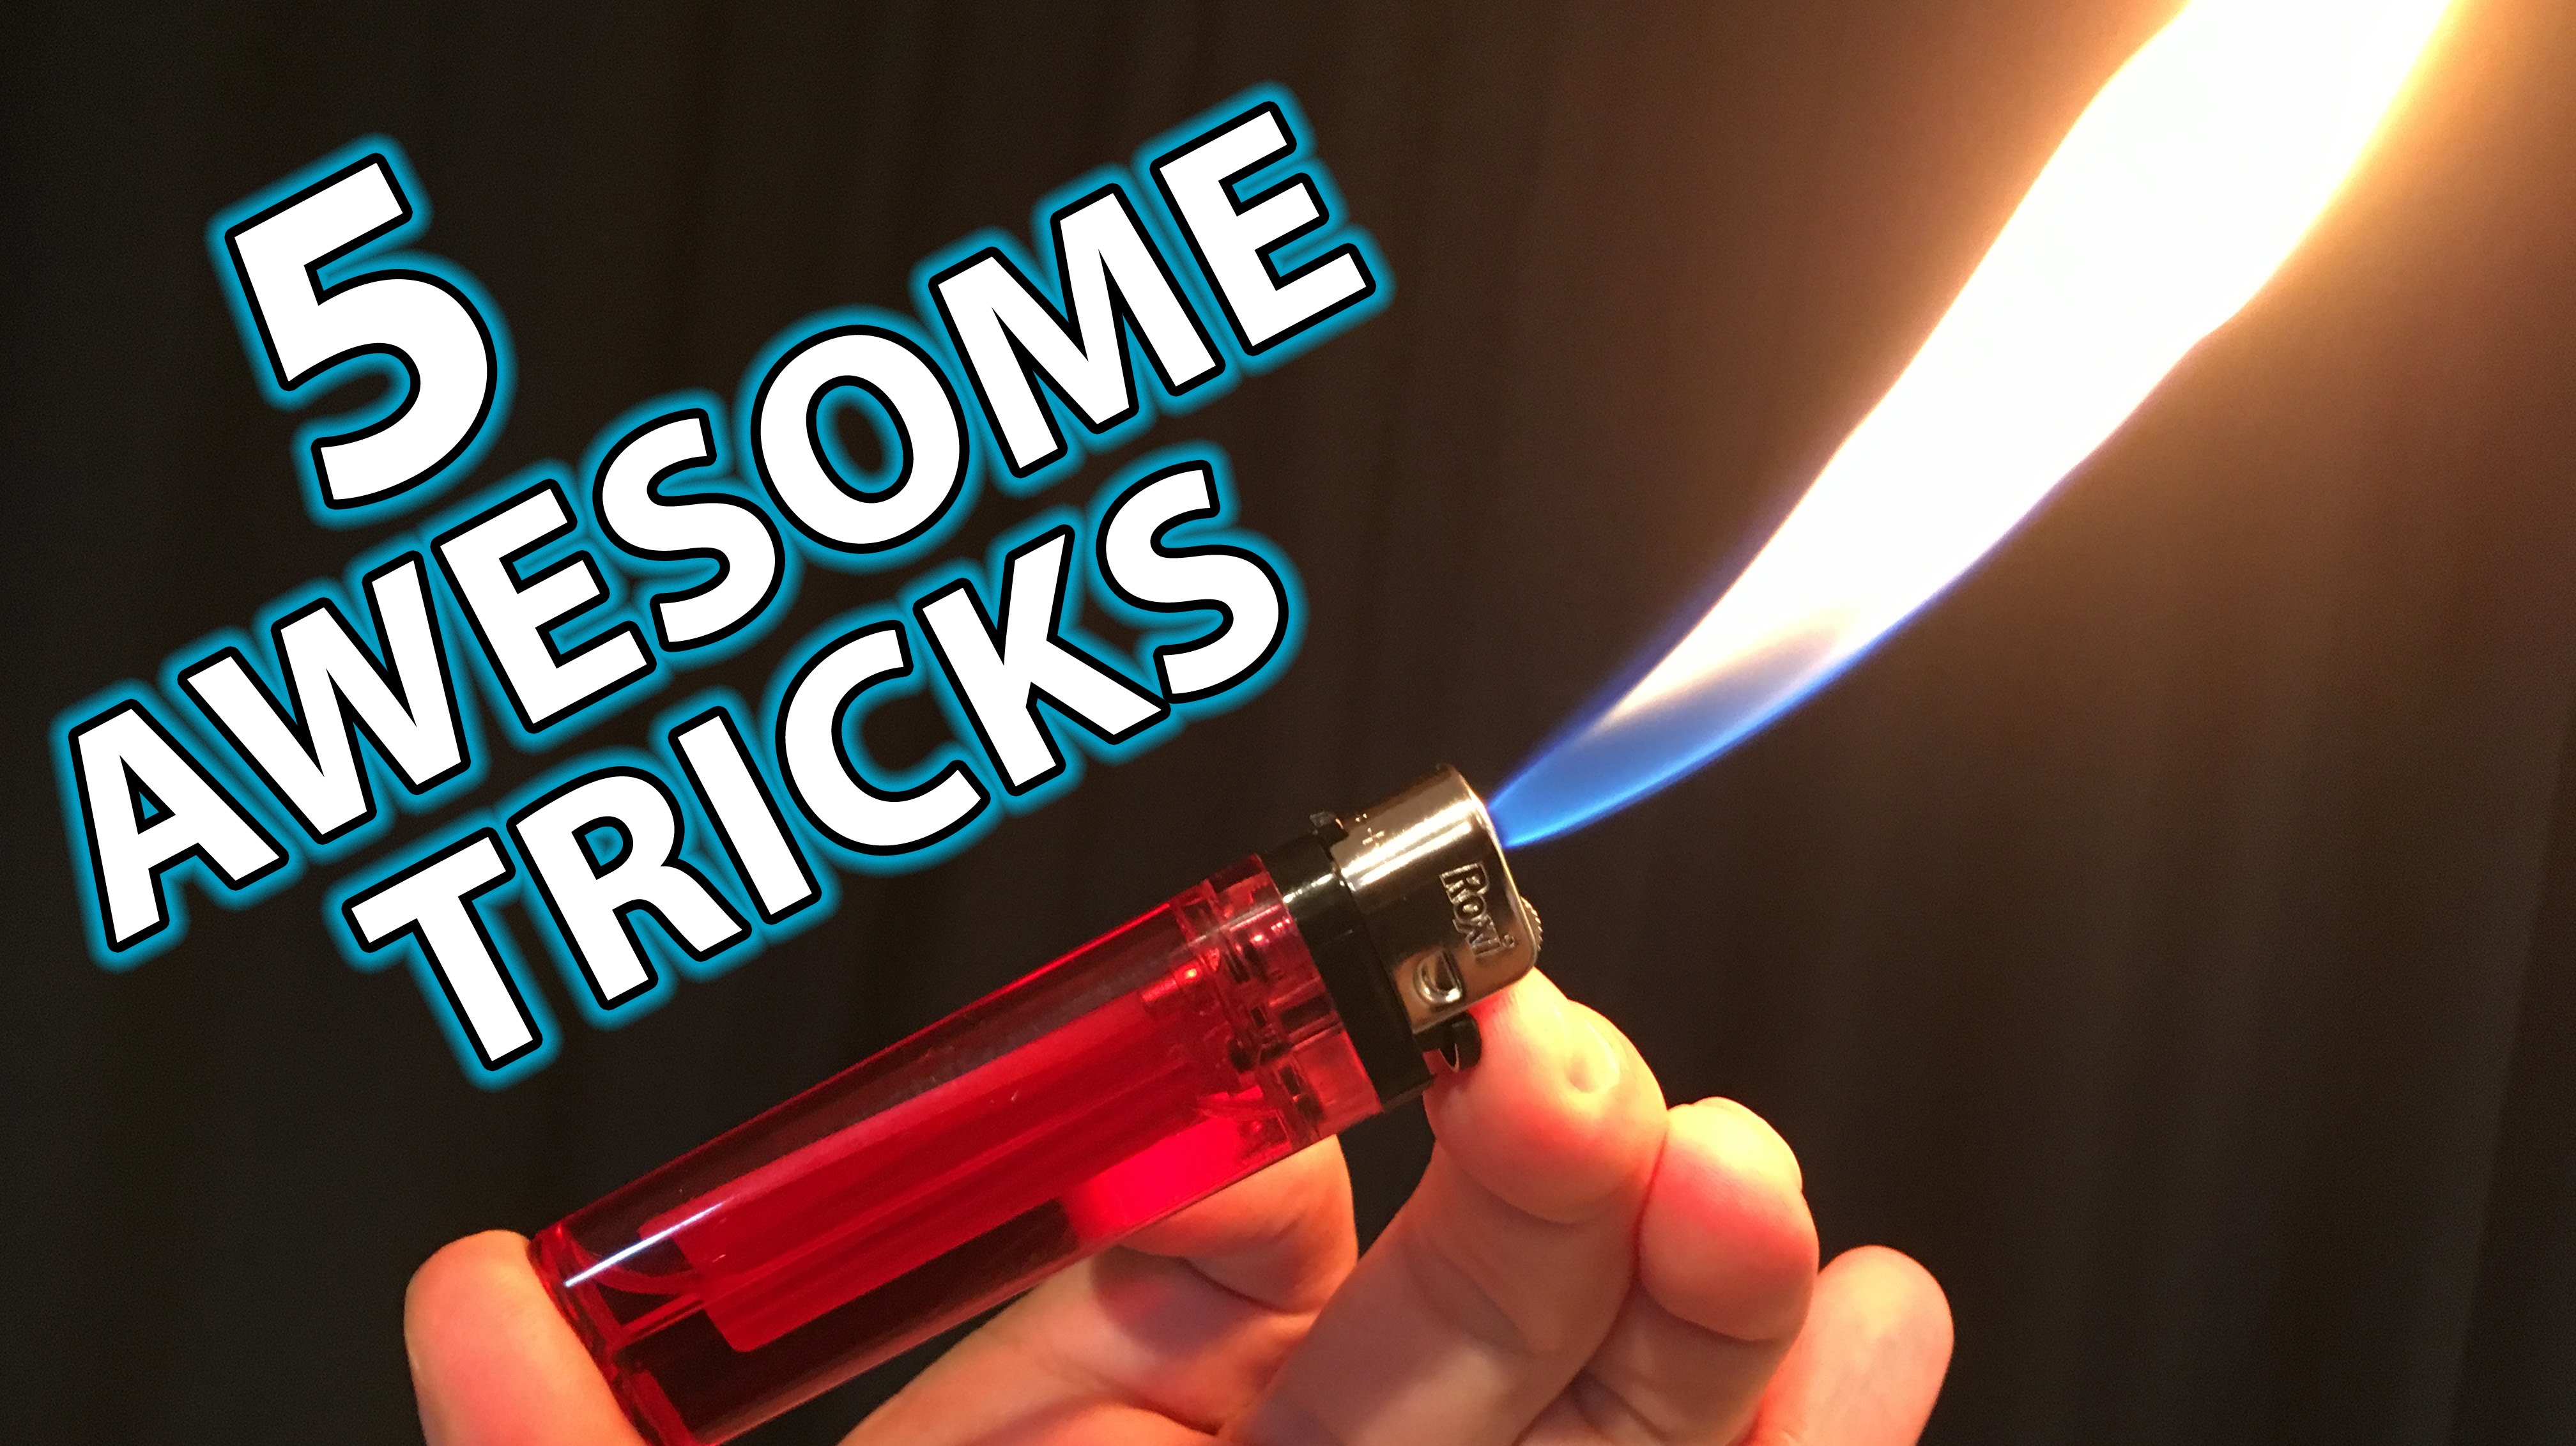 5 Awesome Magic Tricks Hacks with Lighters - YouTube